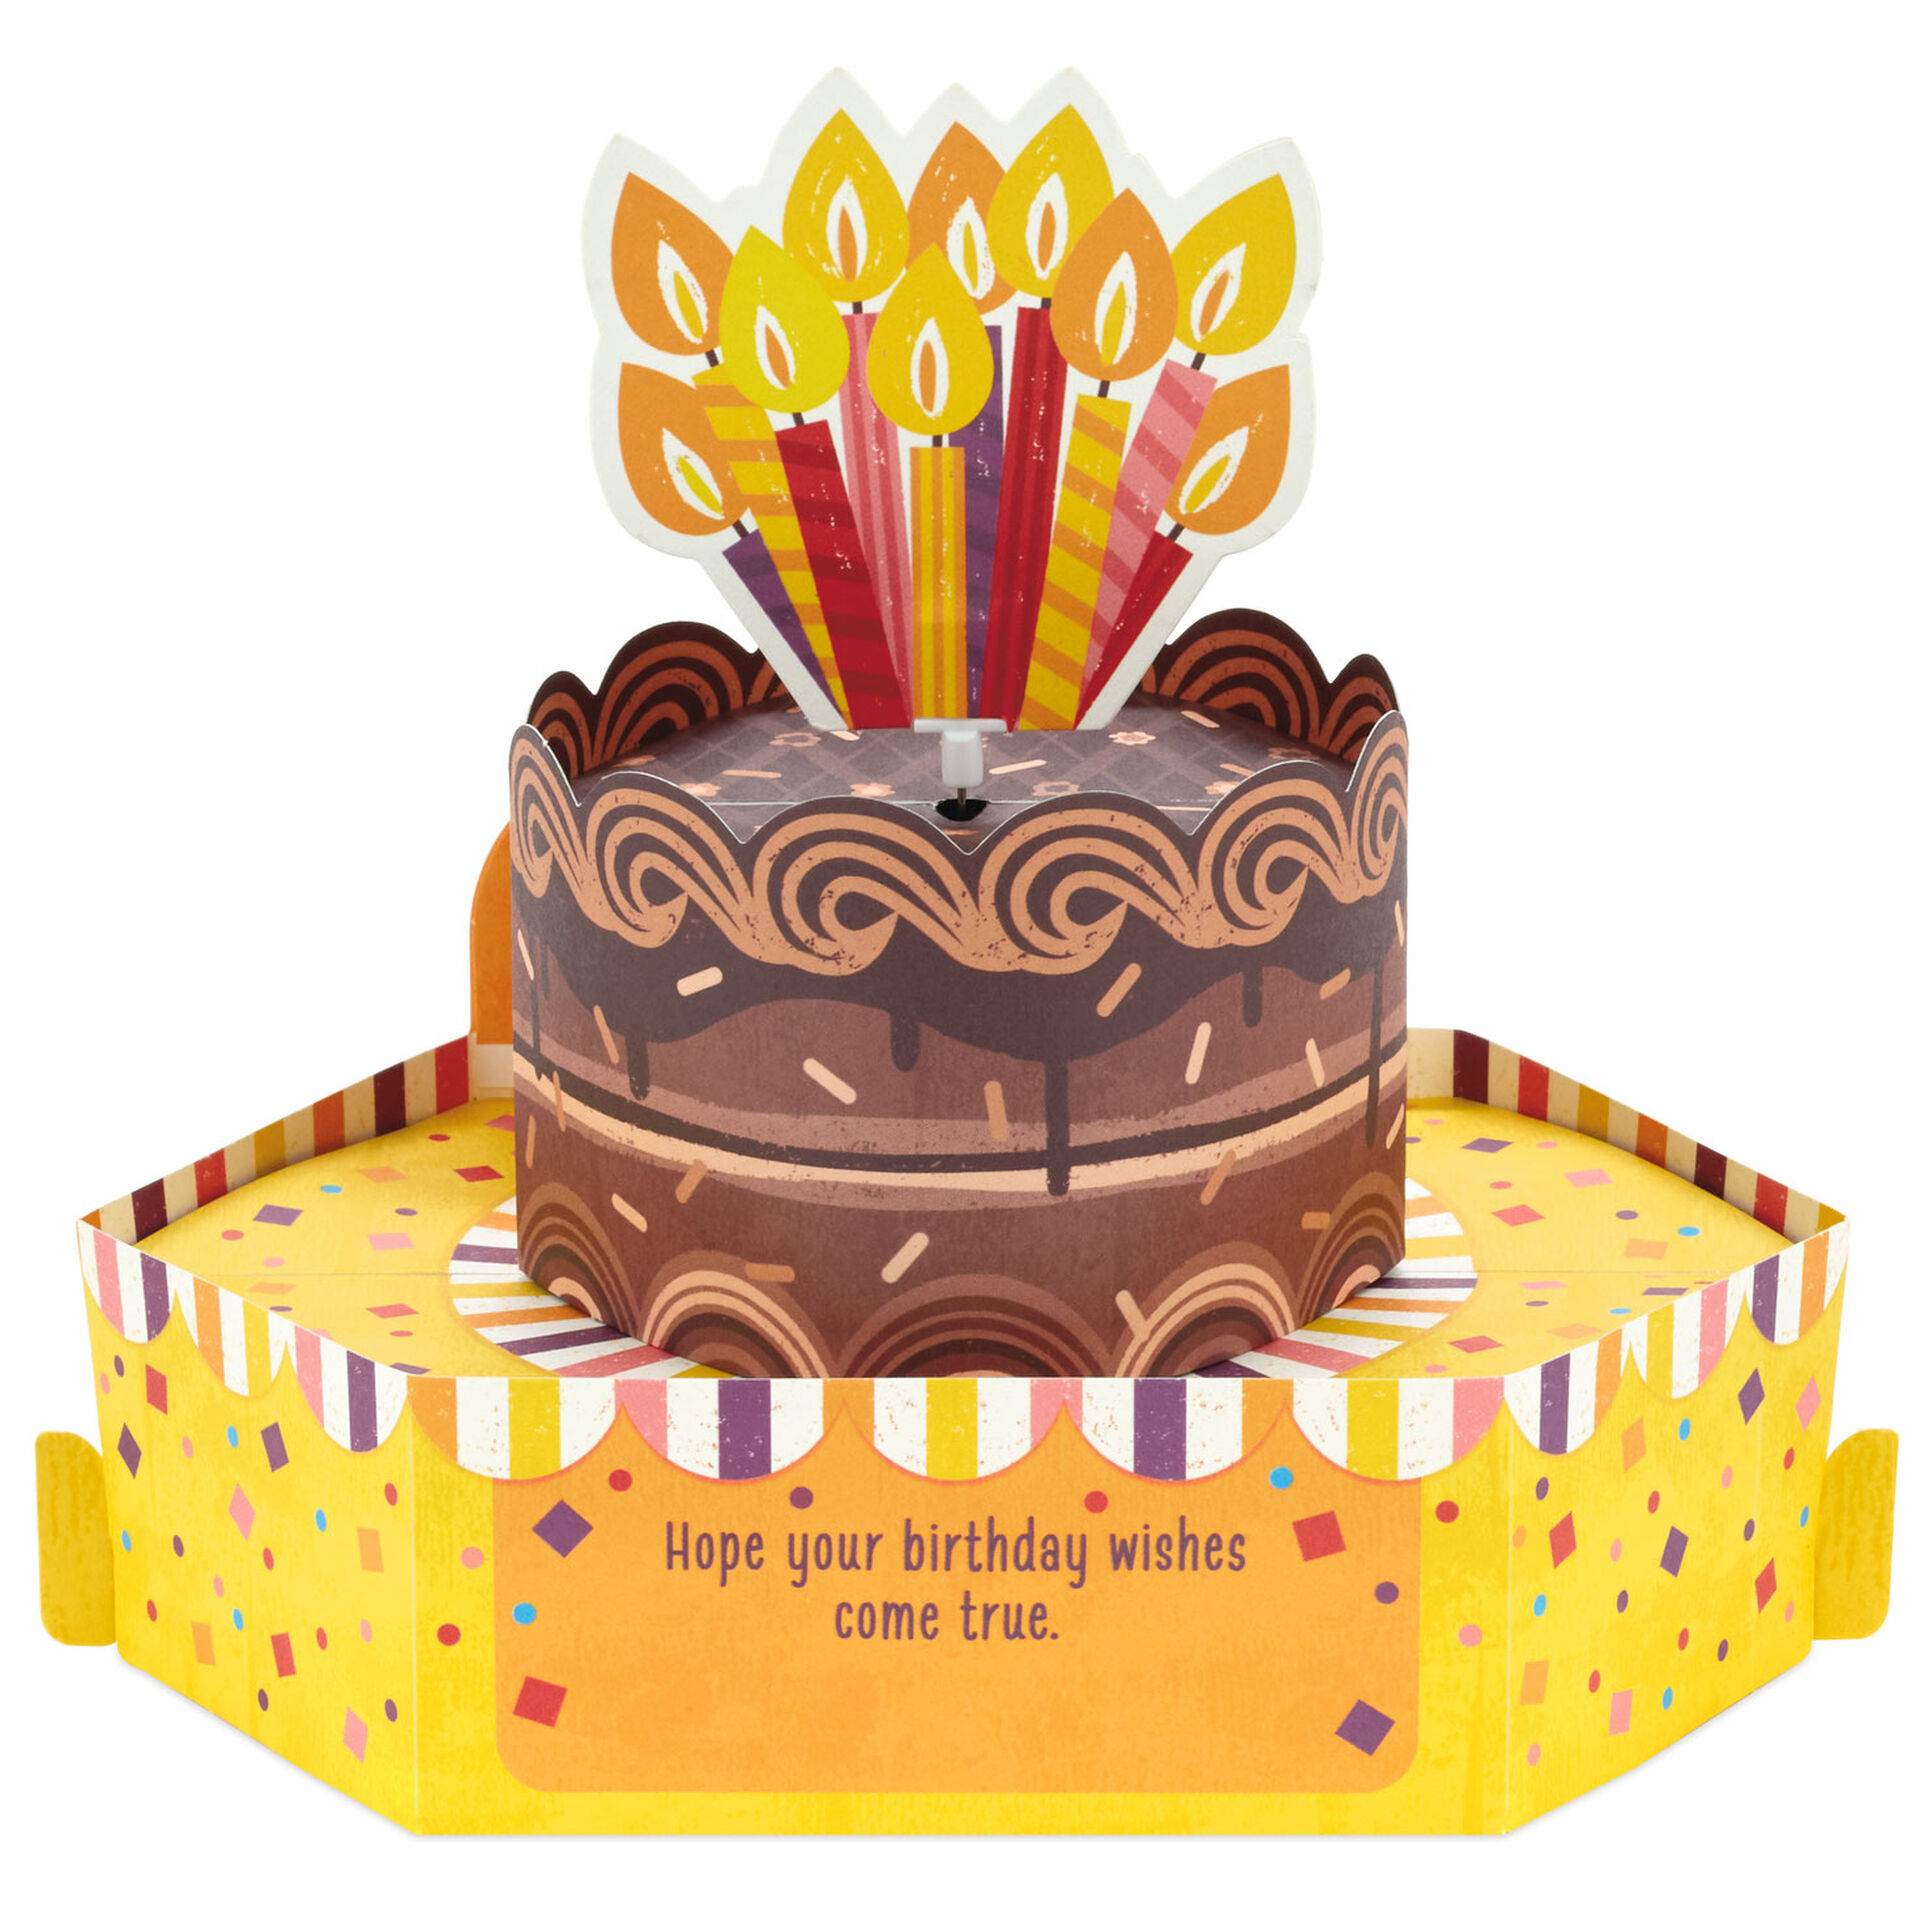 Cake-Music-and-Motion-3D-PopUp-Birthday-Card_1199ARH1377_03